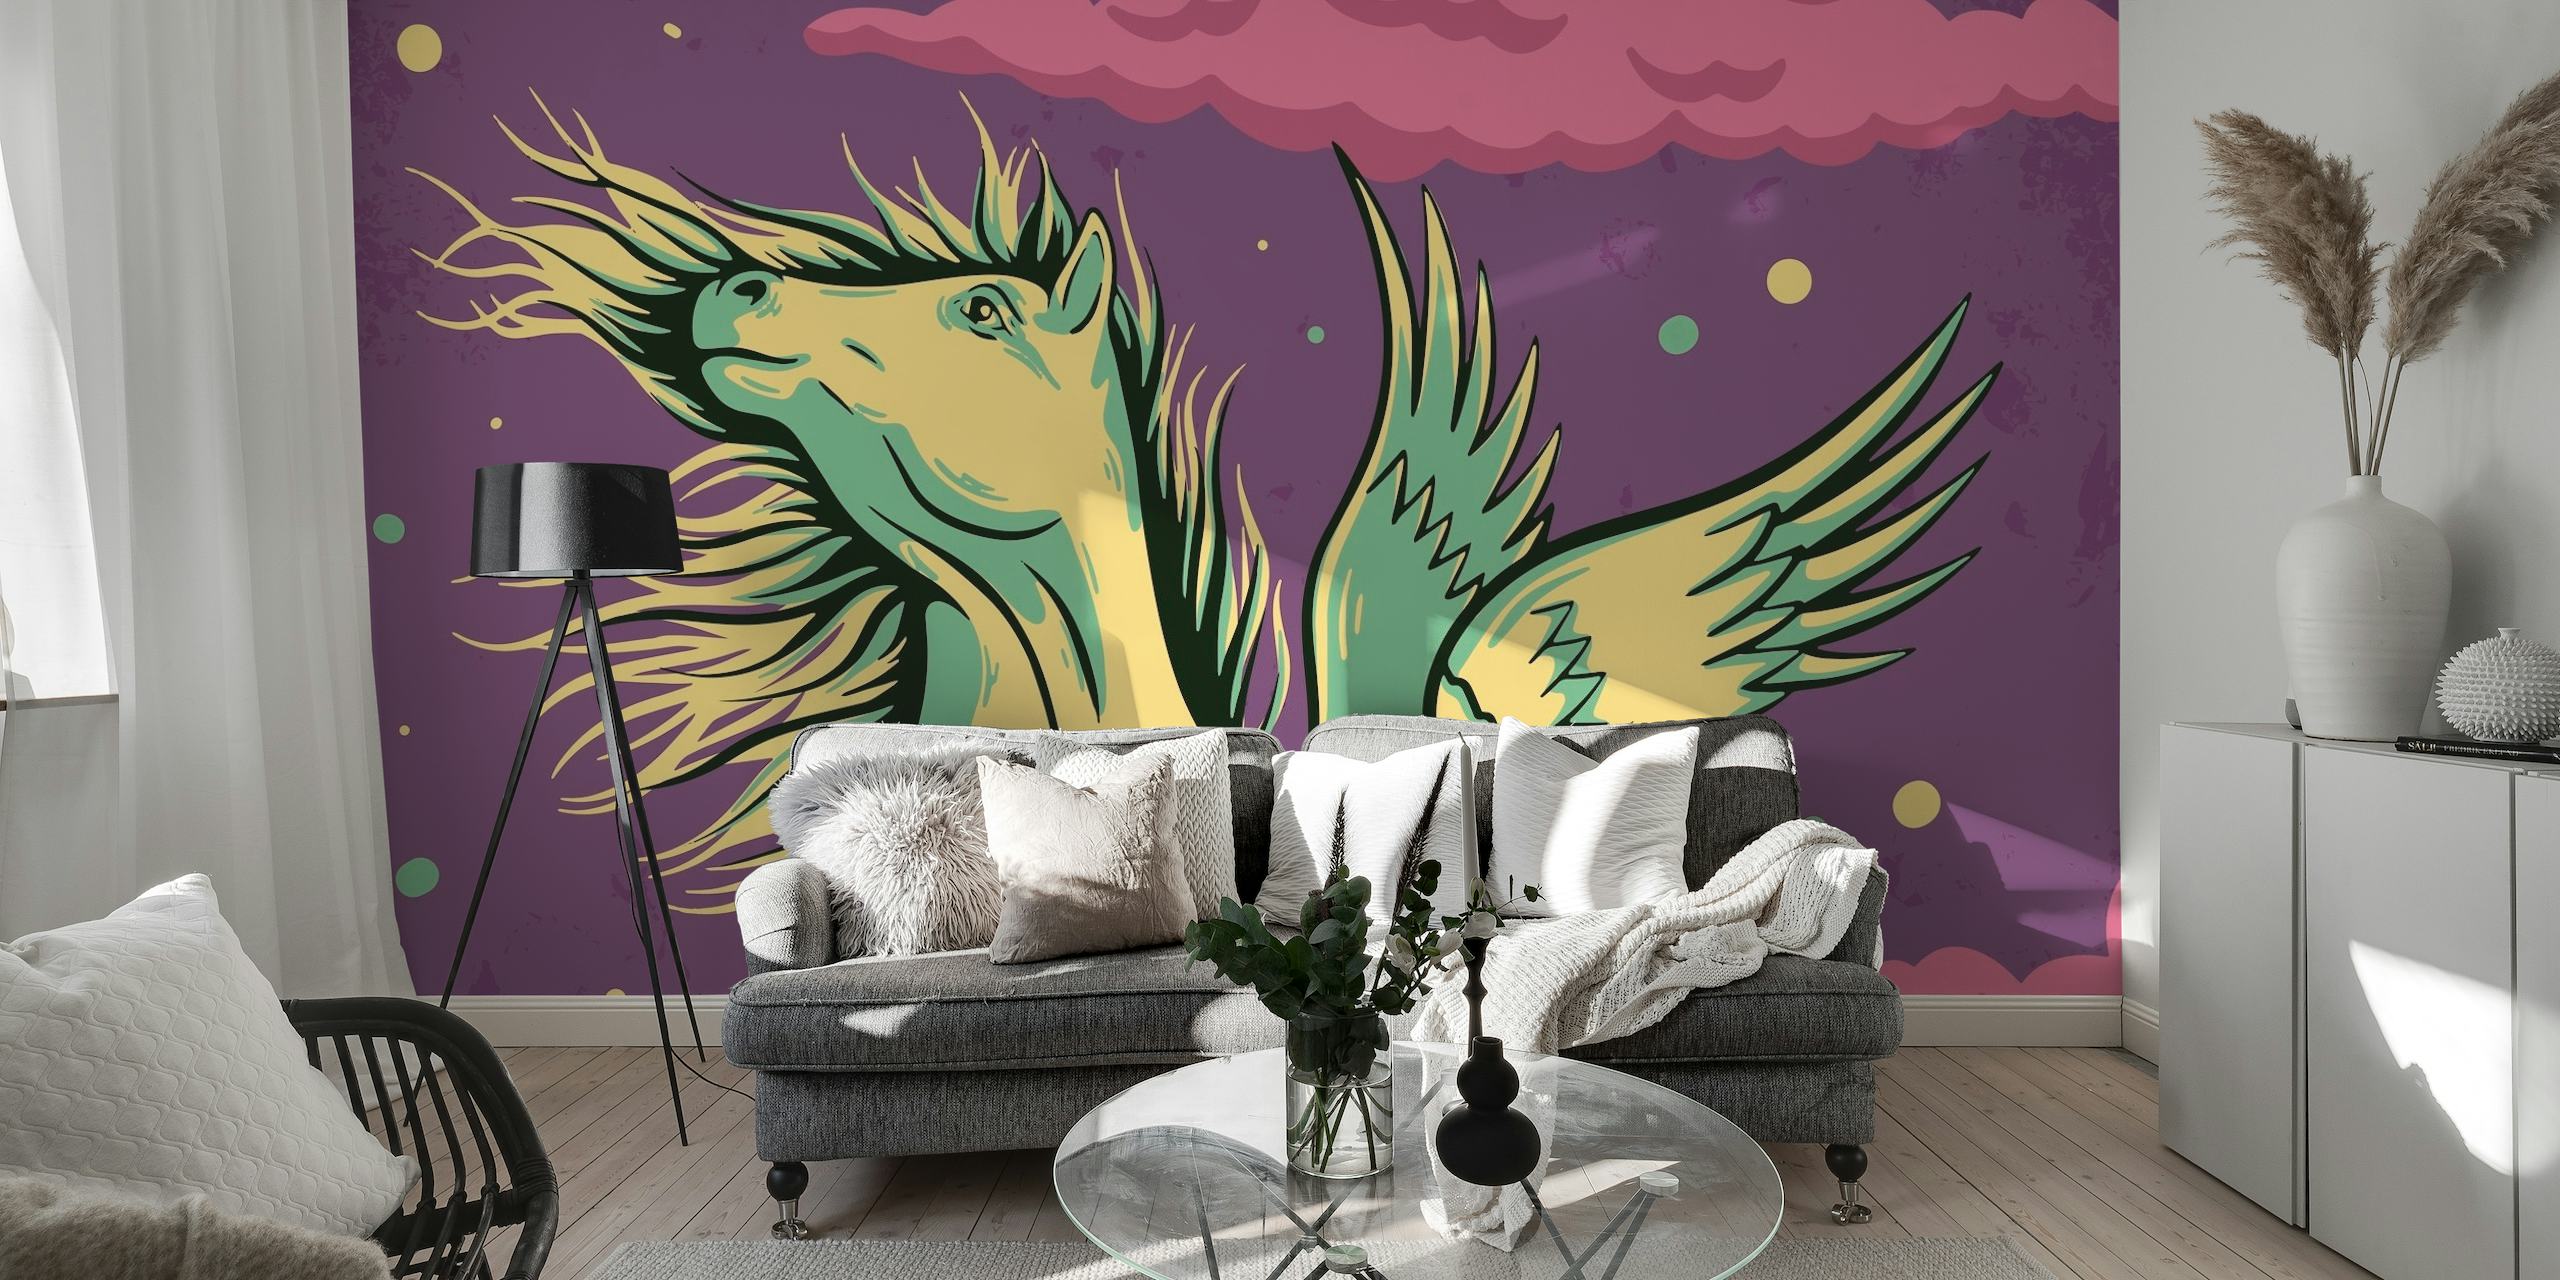 Pegasus wall mural with mythical horse in a starry purple sky